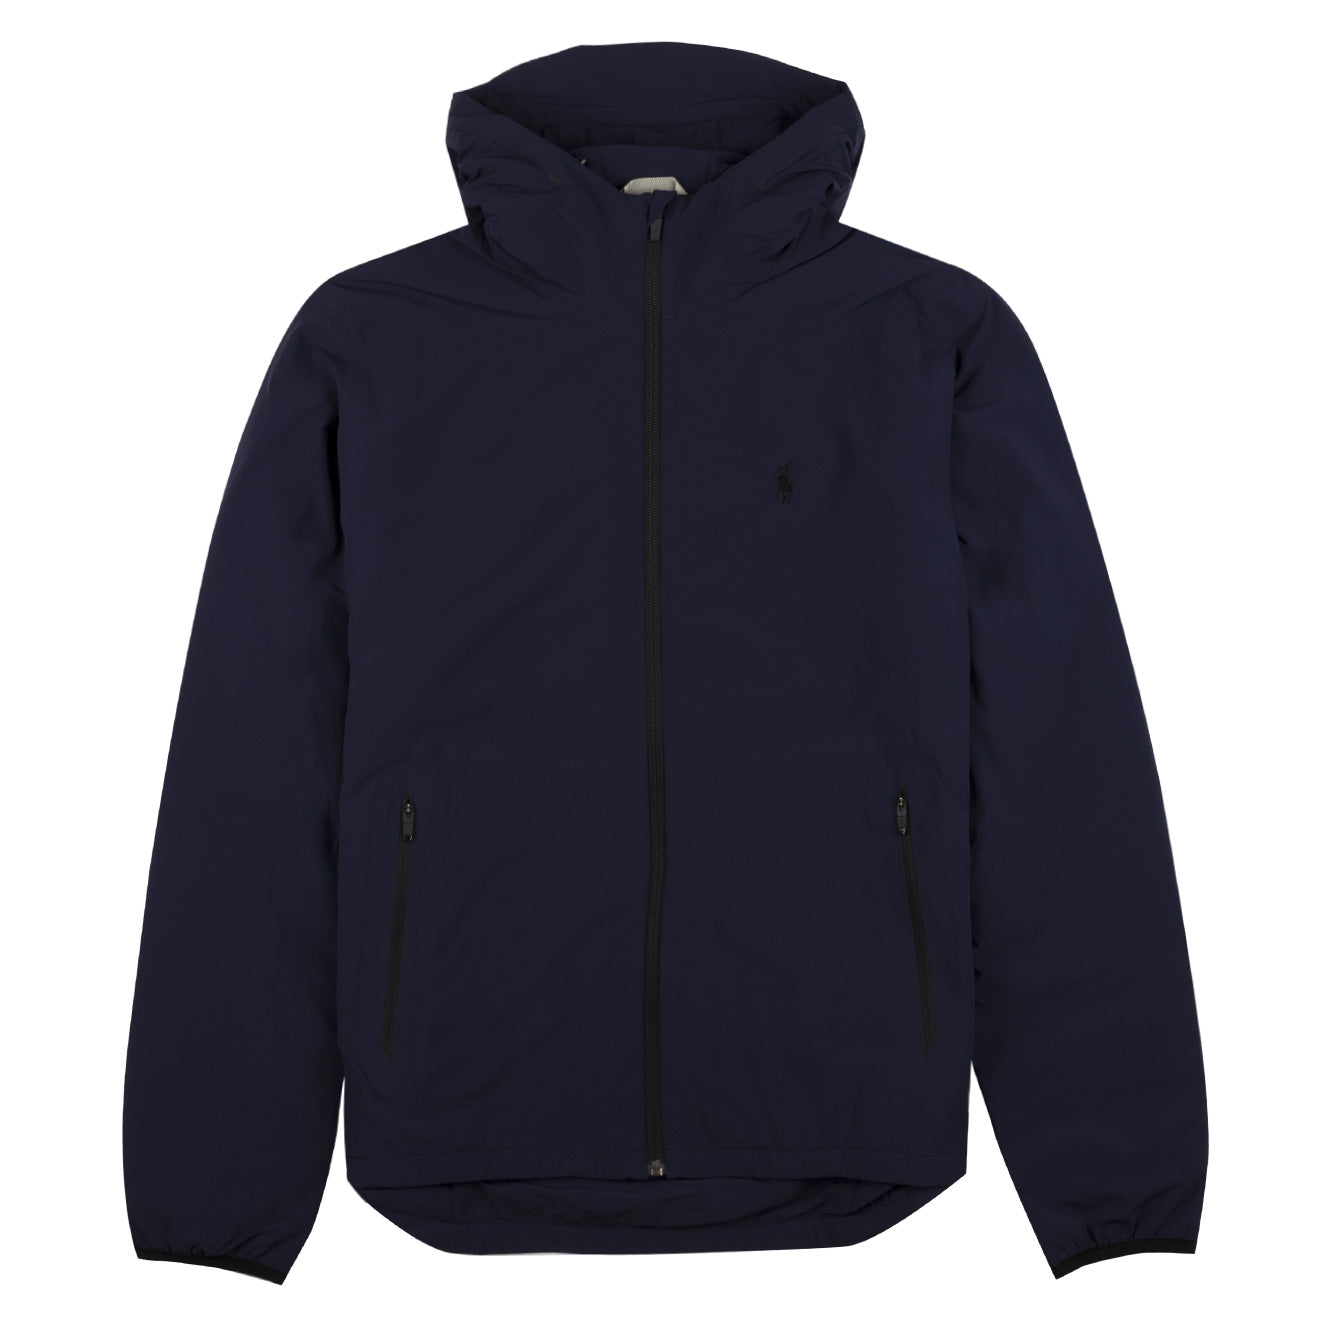 Polo Ralph Lauren Ascent Poly Fill Jacket French Navy | The Sporting Lodge